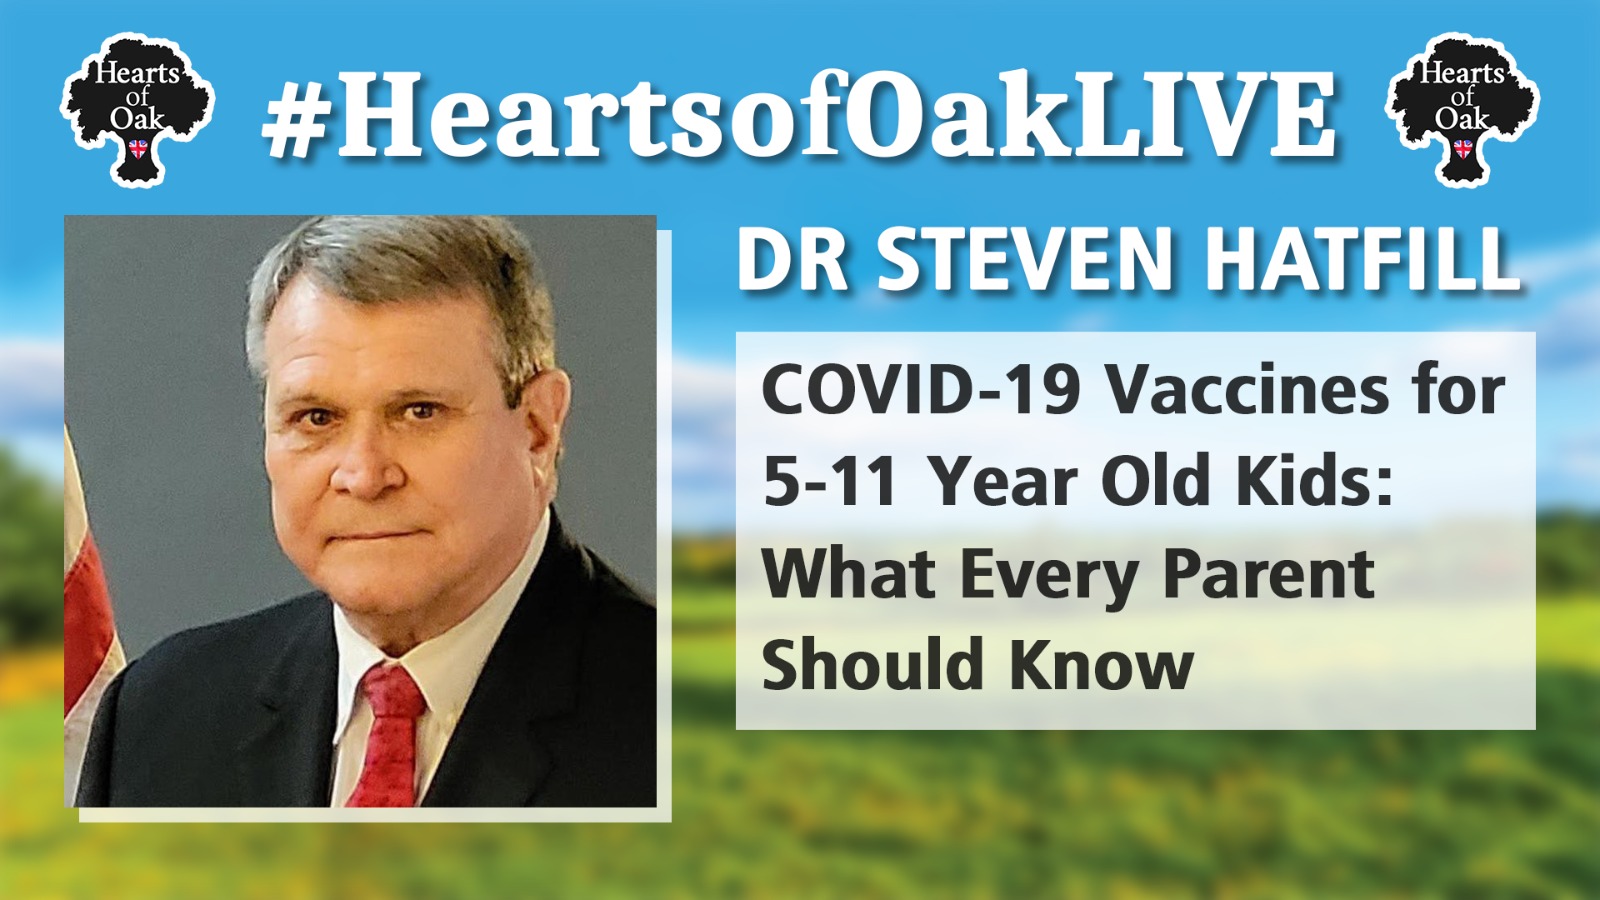 Dr Steve Hatfill, COVID-19 Vaccines for 5-11 Year Old Kids: What Every Parent Should Know